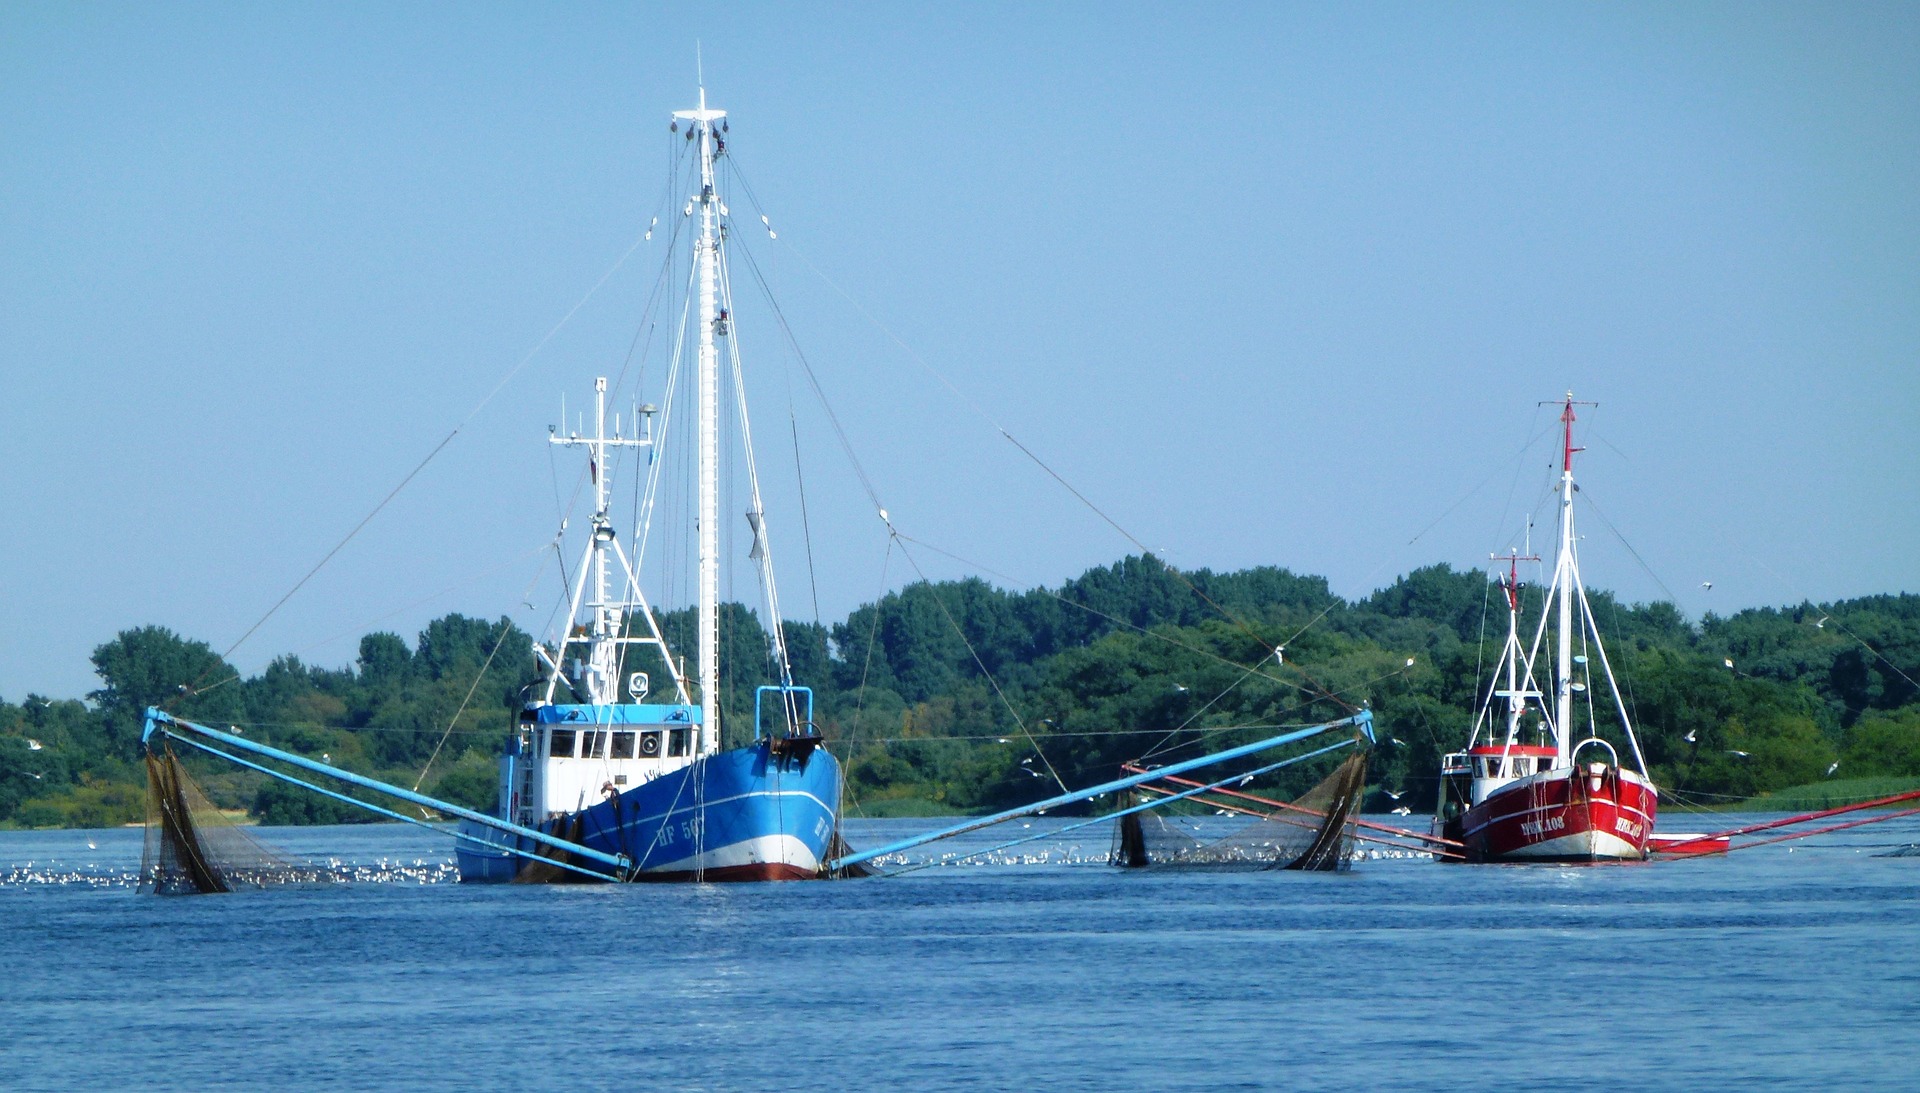 SPIEF 2018 to Discuss Sustainability Factors of Fishing Industry